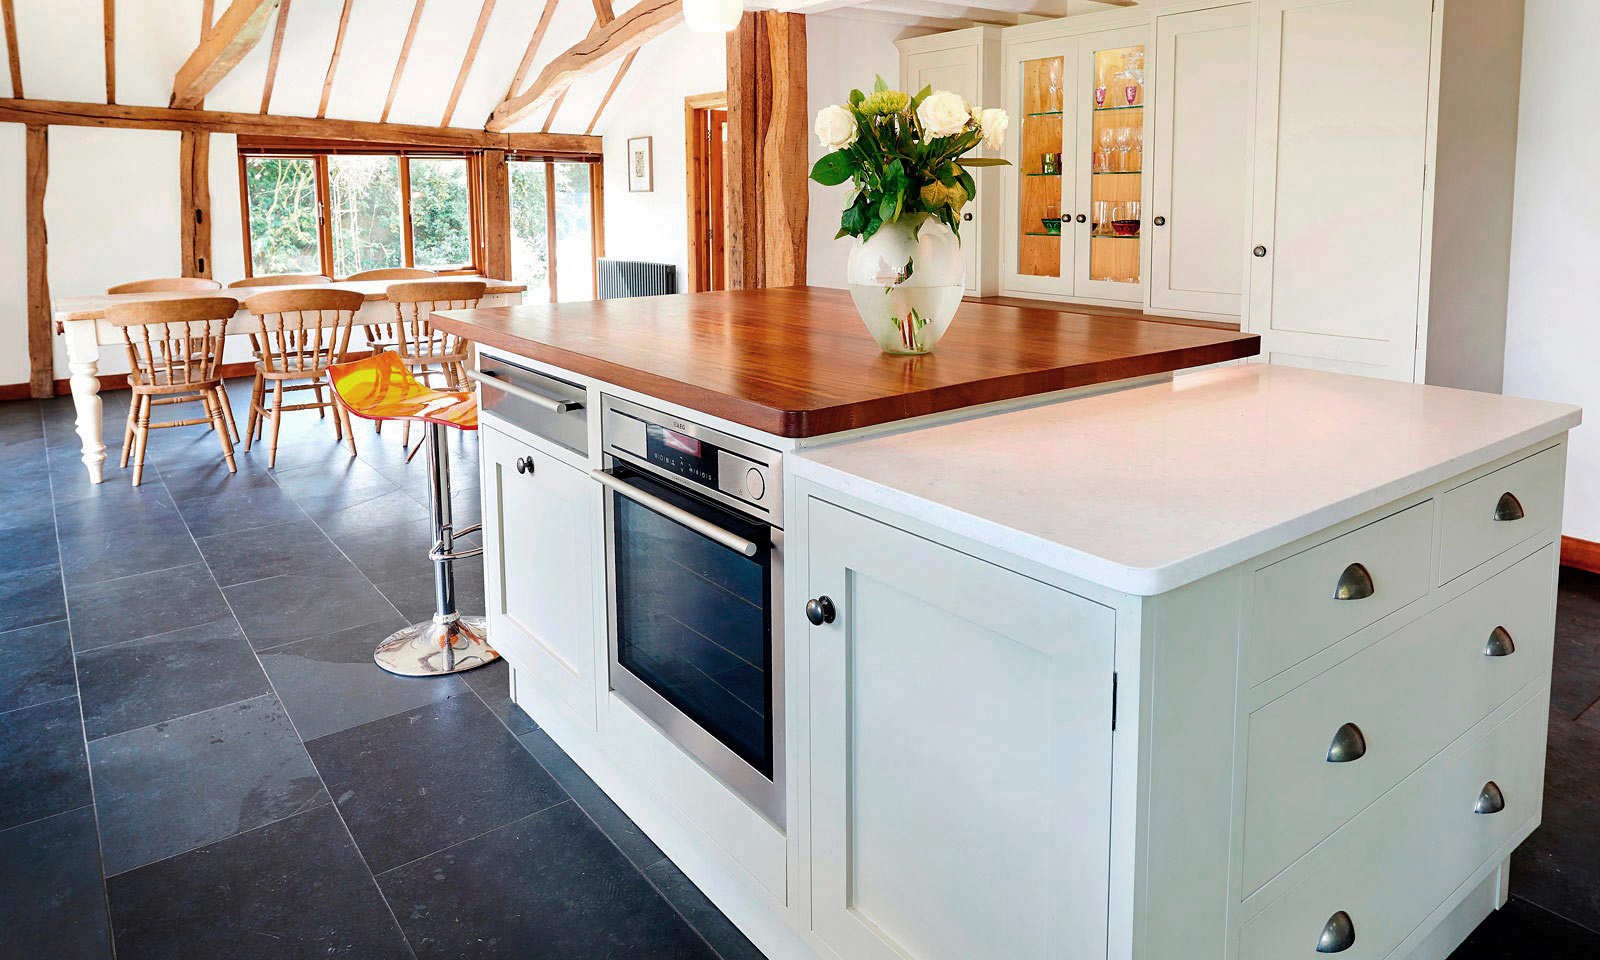 Golford | A bespoke, handmade, hand-painted, shaker kitchen, designed and installed in Kent by Mounts Hill Woodcraft.